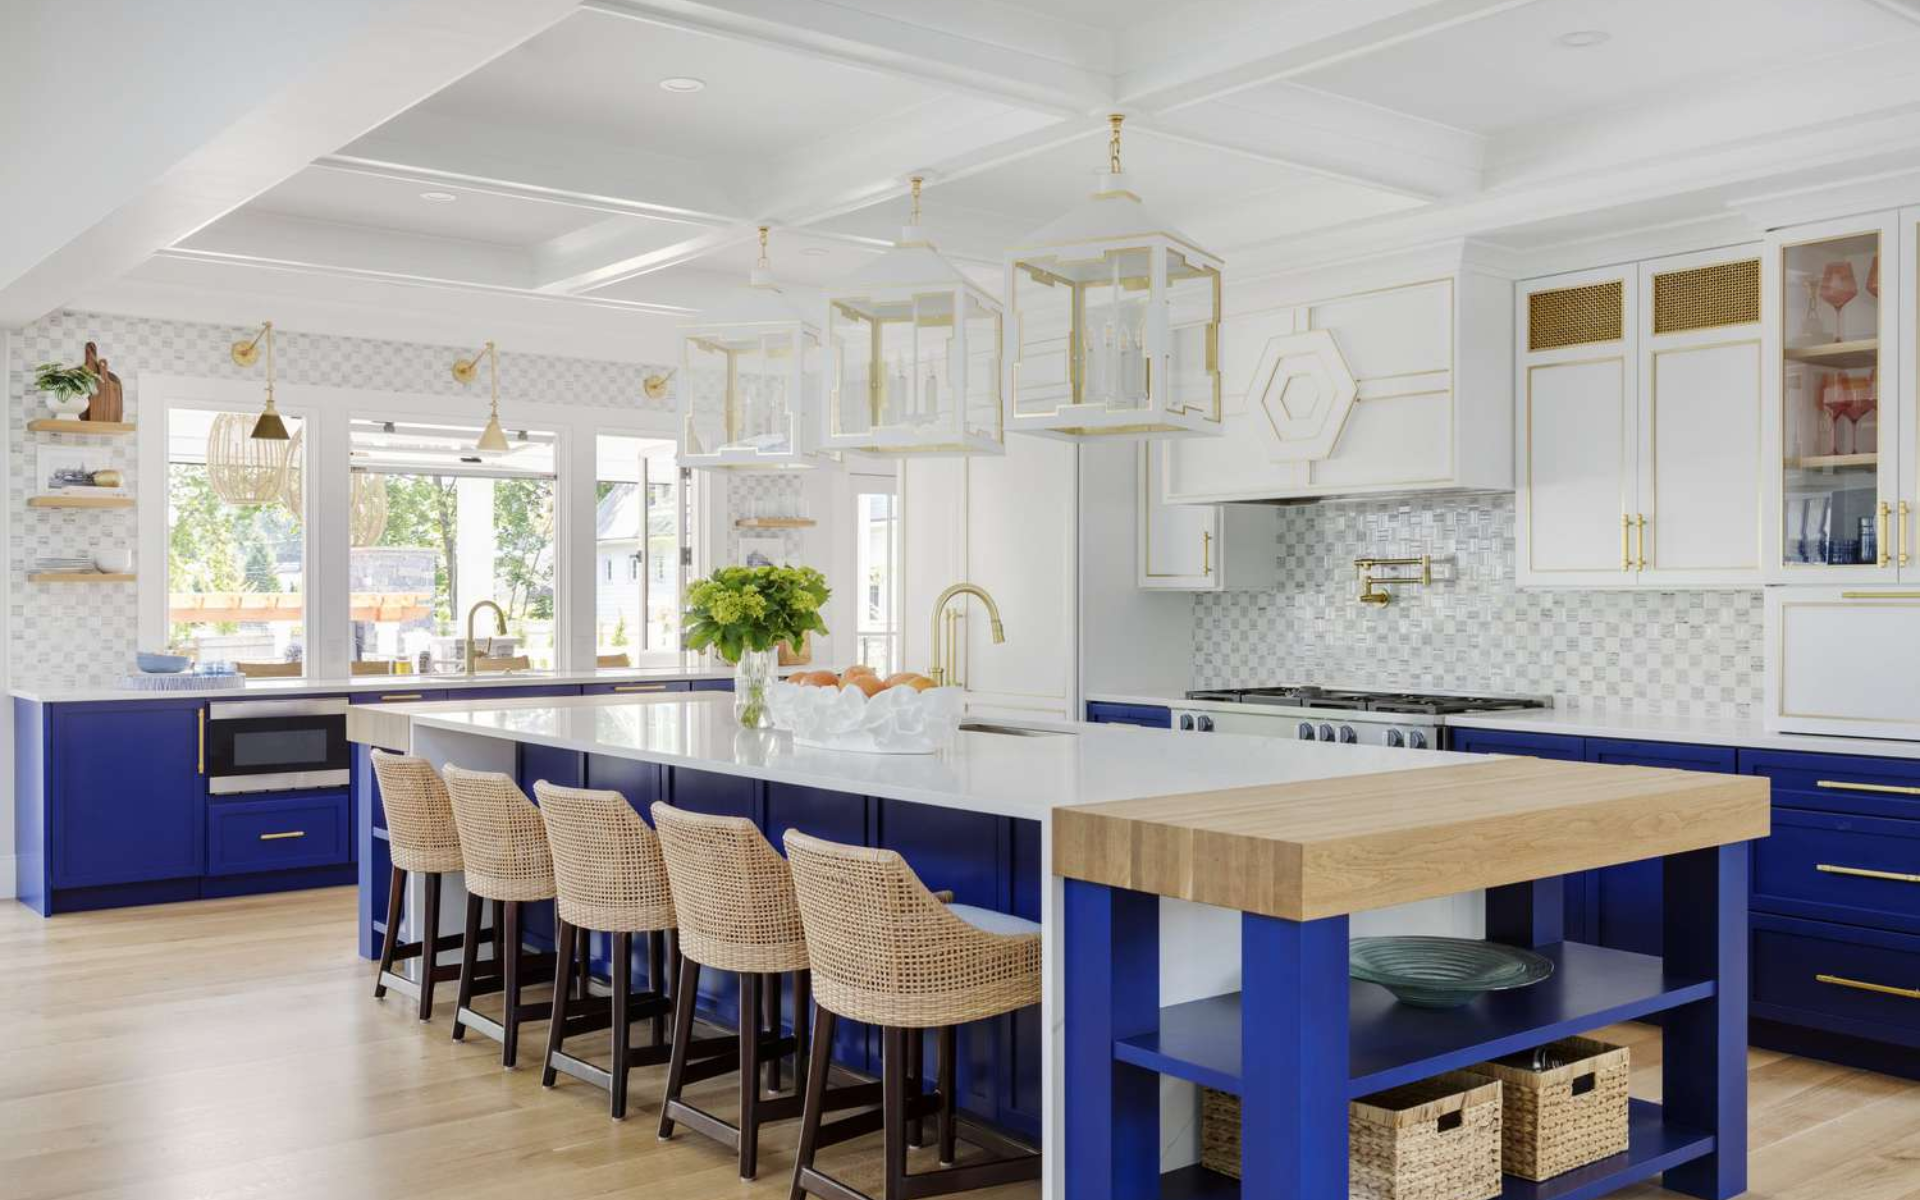 2-toned kitchen with royal blue and white cabinets